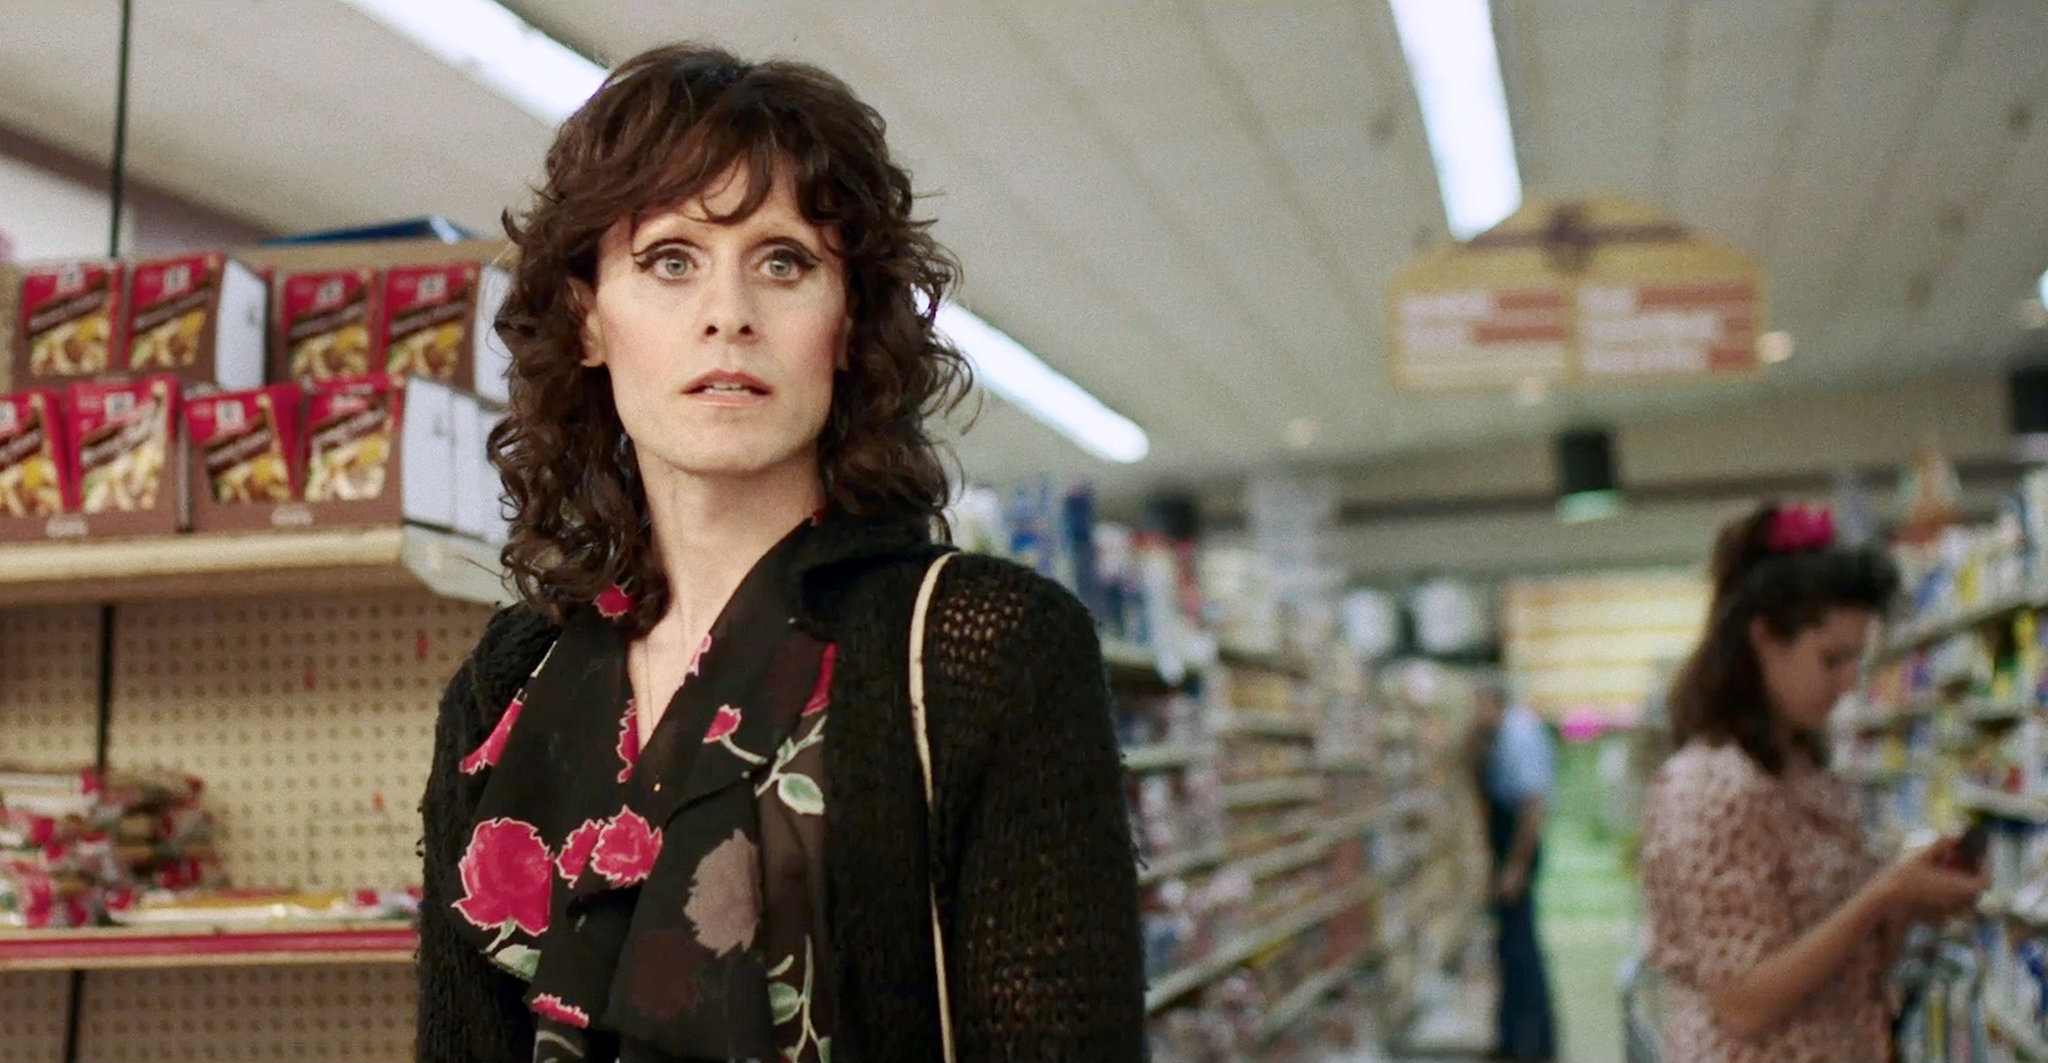 Woman in floral dress and cardigan stands worried in a supermarket aisle; another person in the background